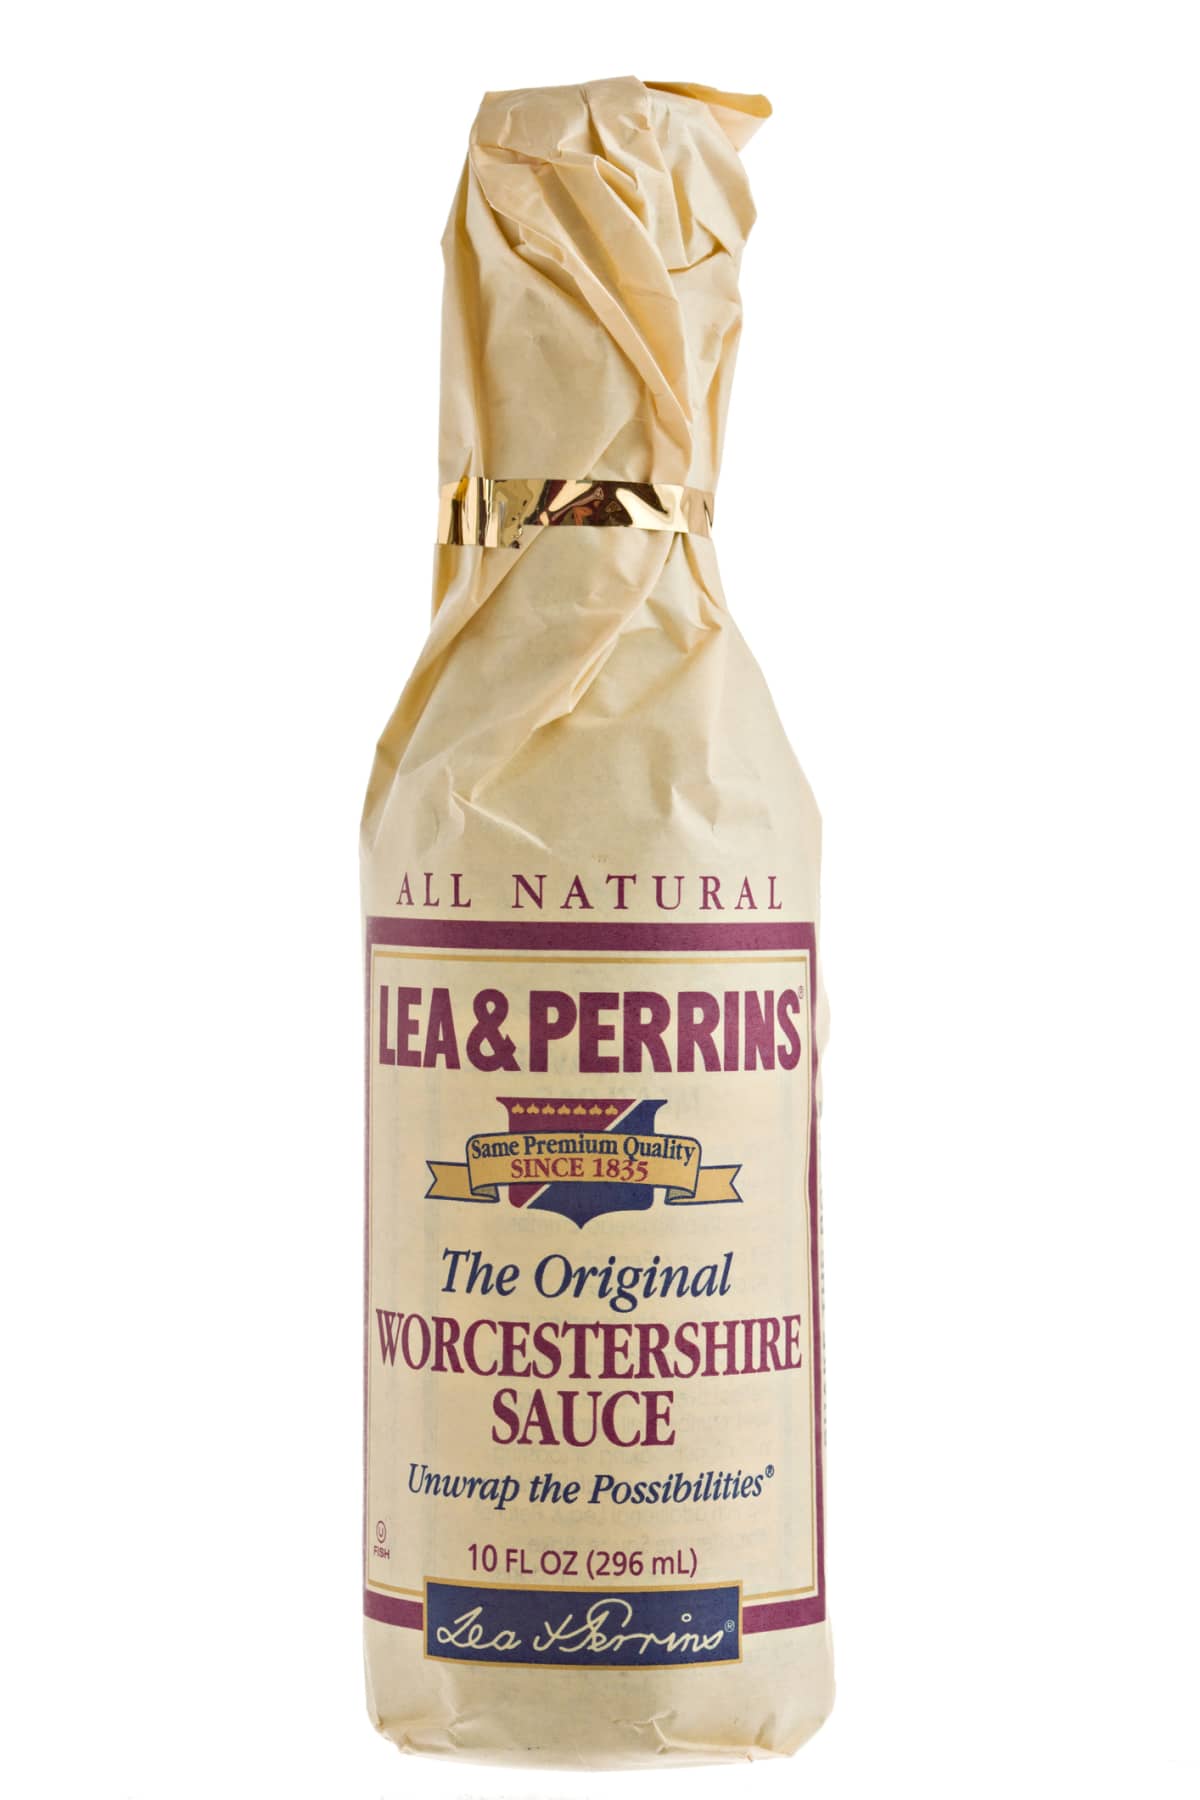 Miami, Florida, USA - May 27, 2015: 5 Ounces Bottle of Lea & Perrins Worcestershire Sauce on White Background.